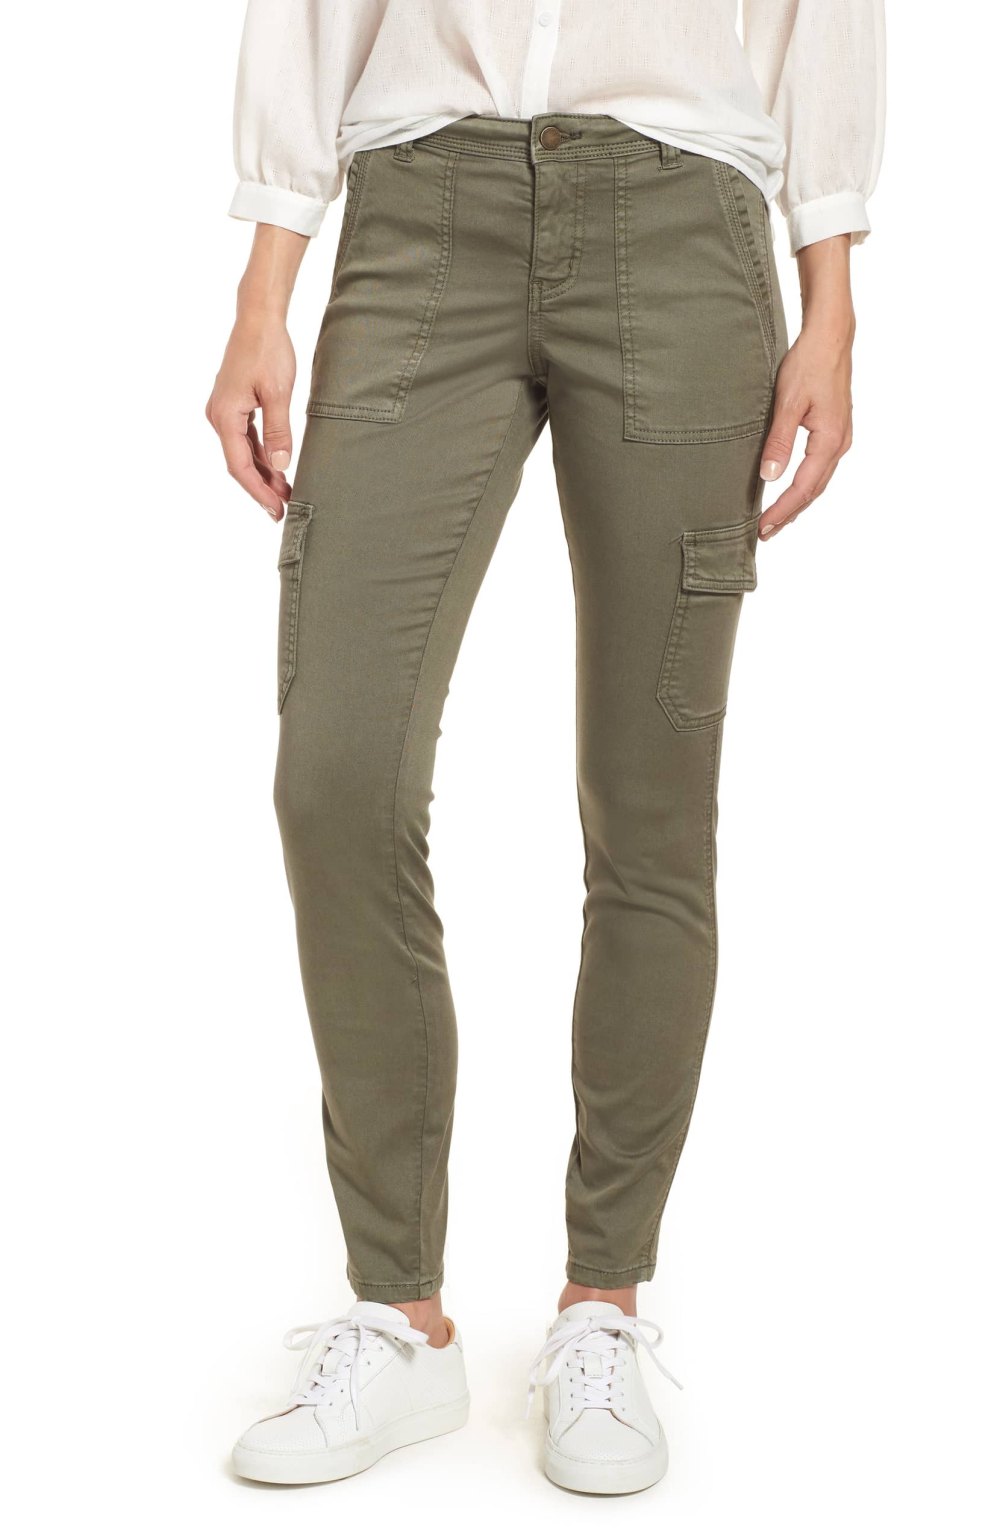 These Utility Pants Are Perfect for Throw and Go Looks | Us Weekly